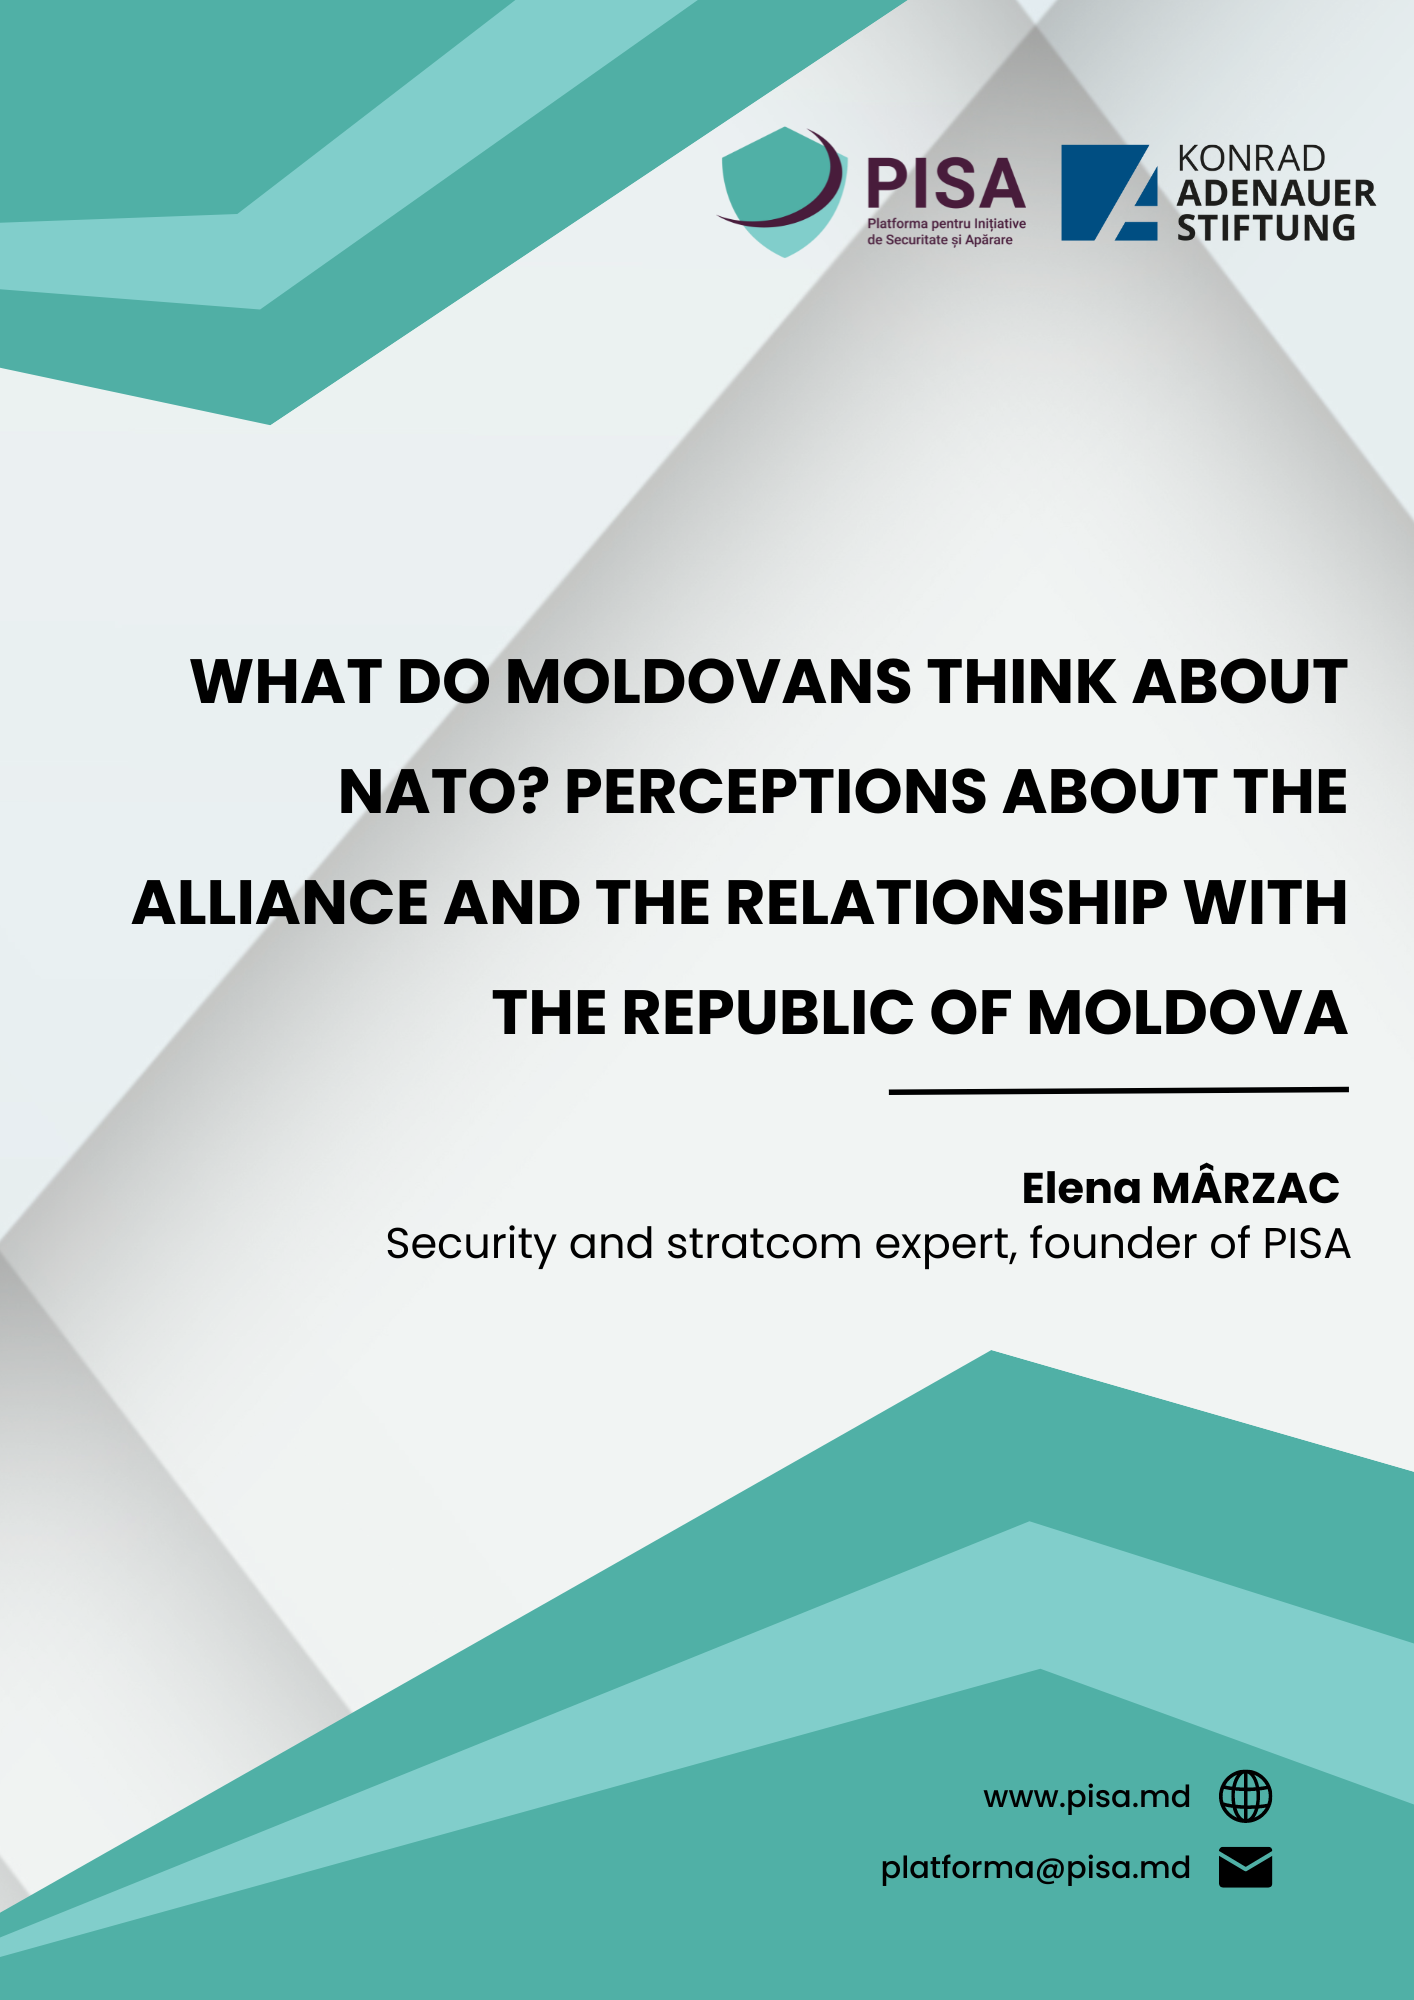 What do Moldovans think about NATO? Perceptions about the Alliance and the relationship with the Republic of Moldova